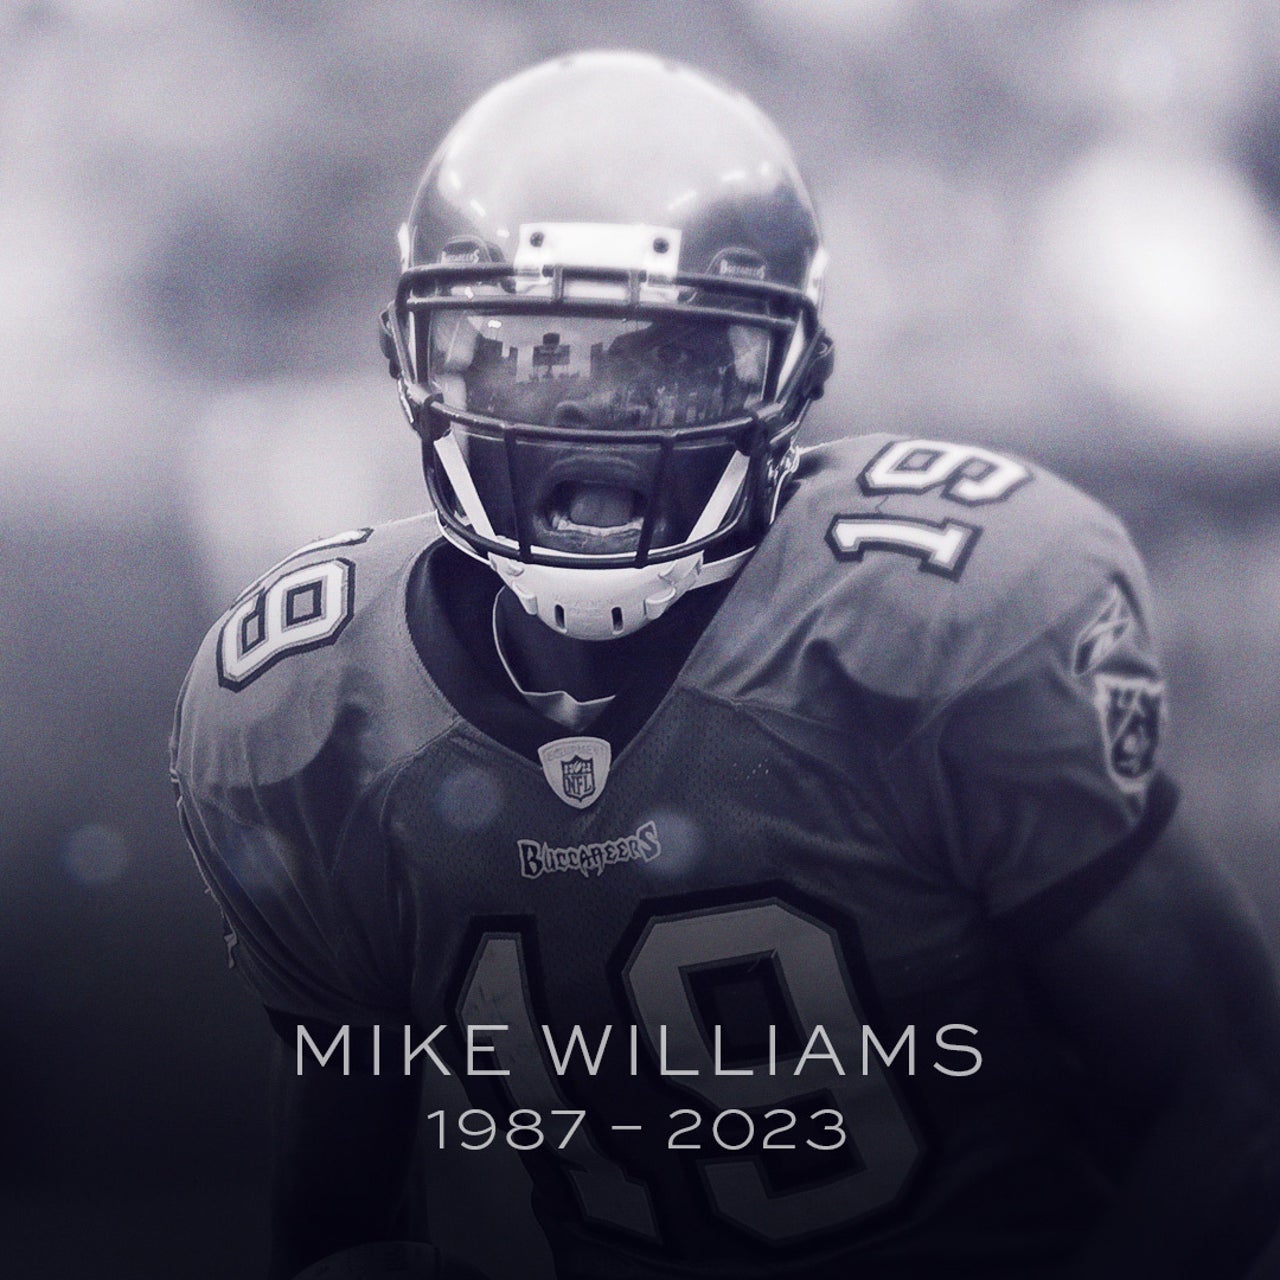 Ex-NFL WR Mike Williams on life support